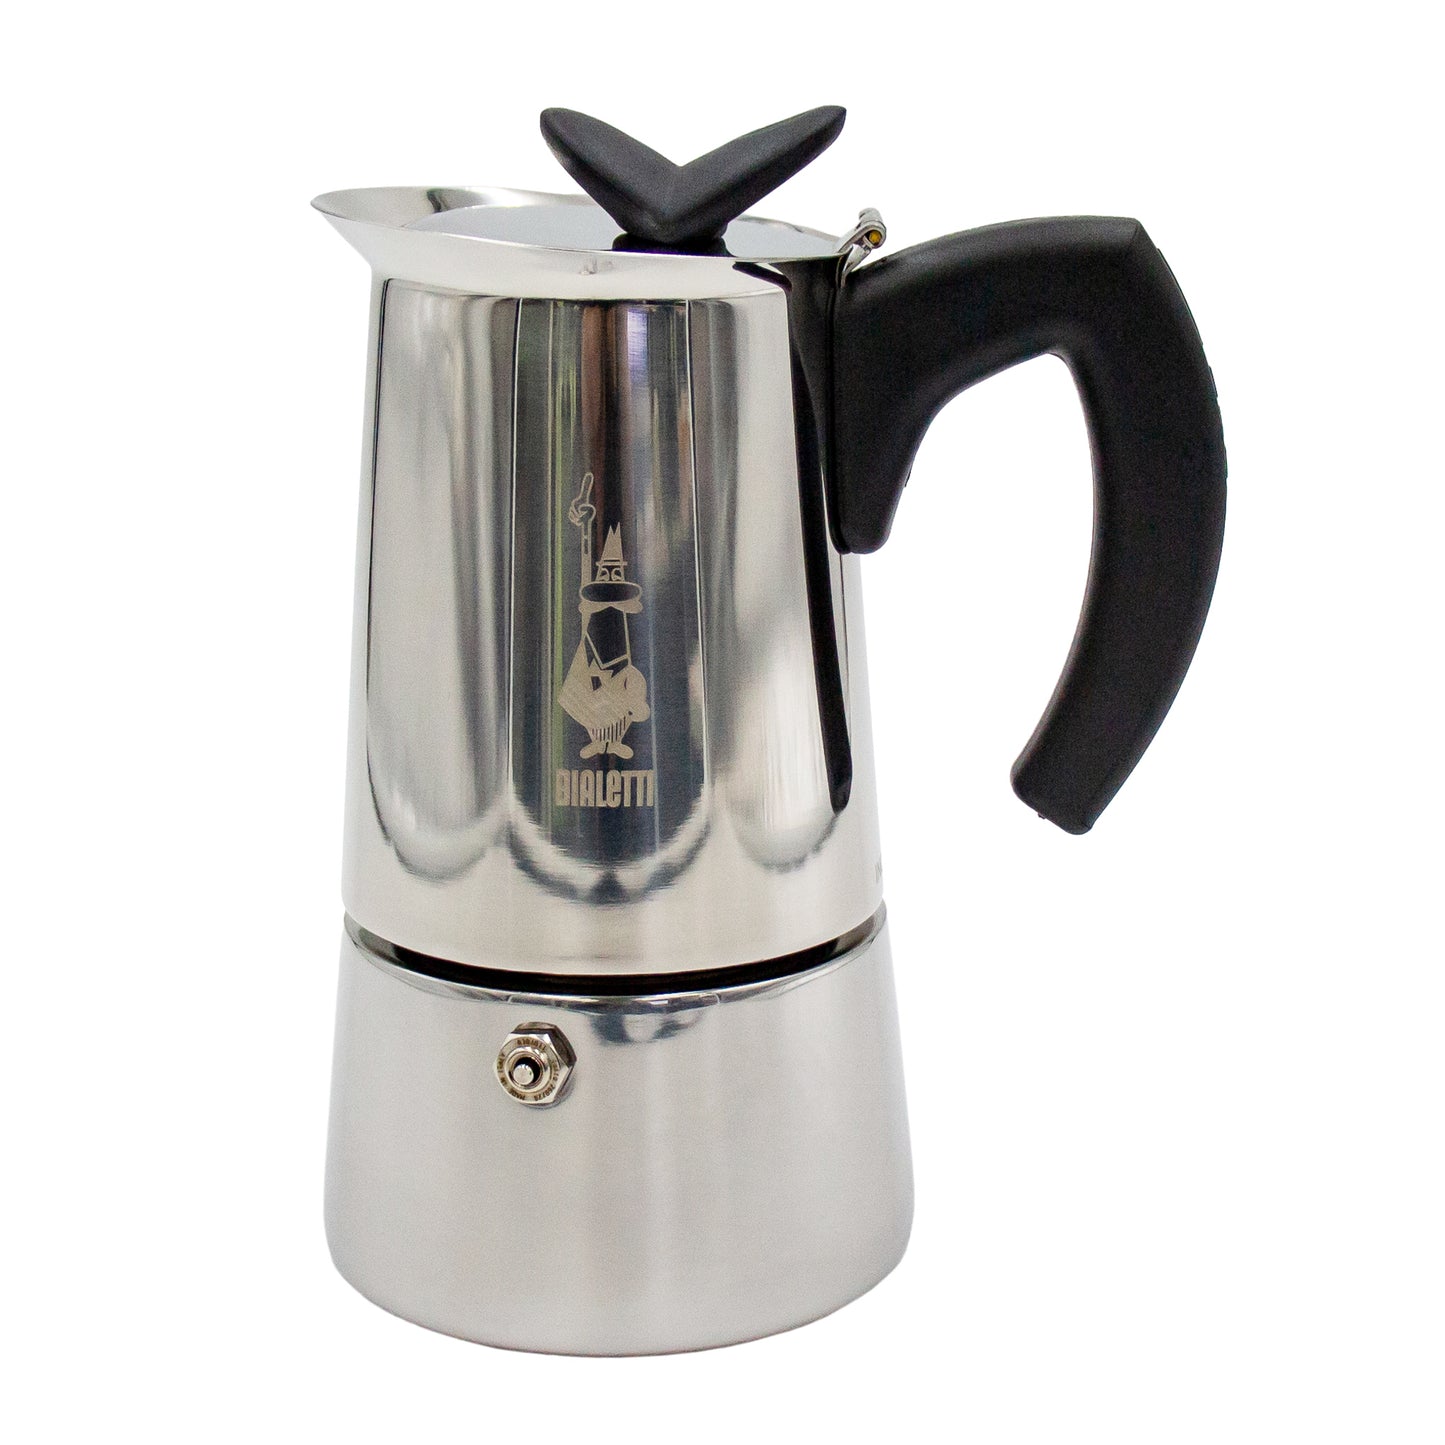 Italian made stainless steel bialetti musa 6 cup espresso coffee maker